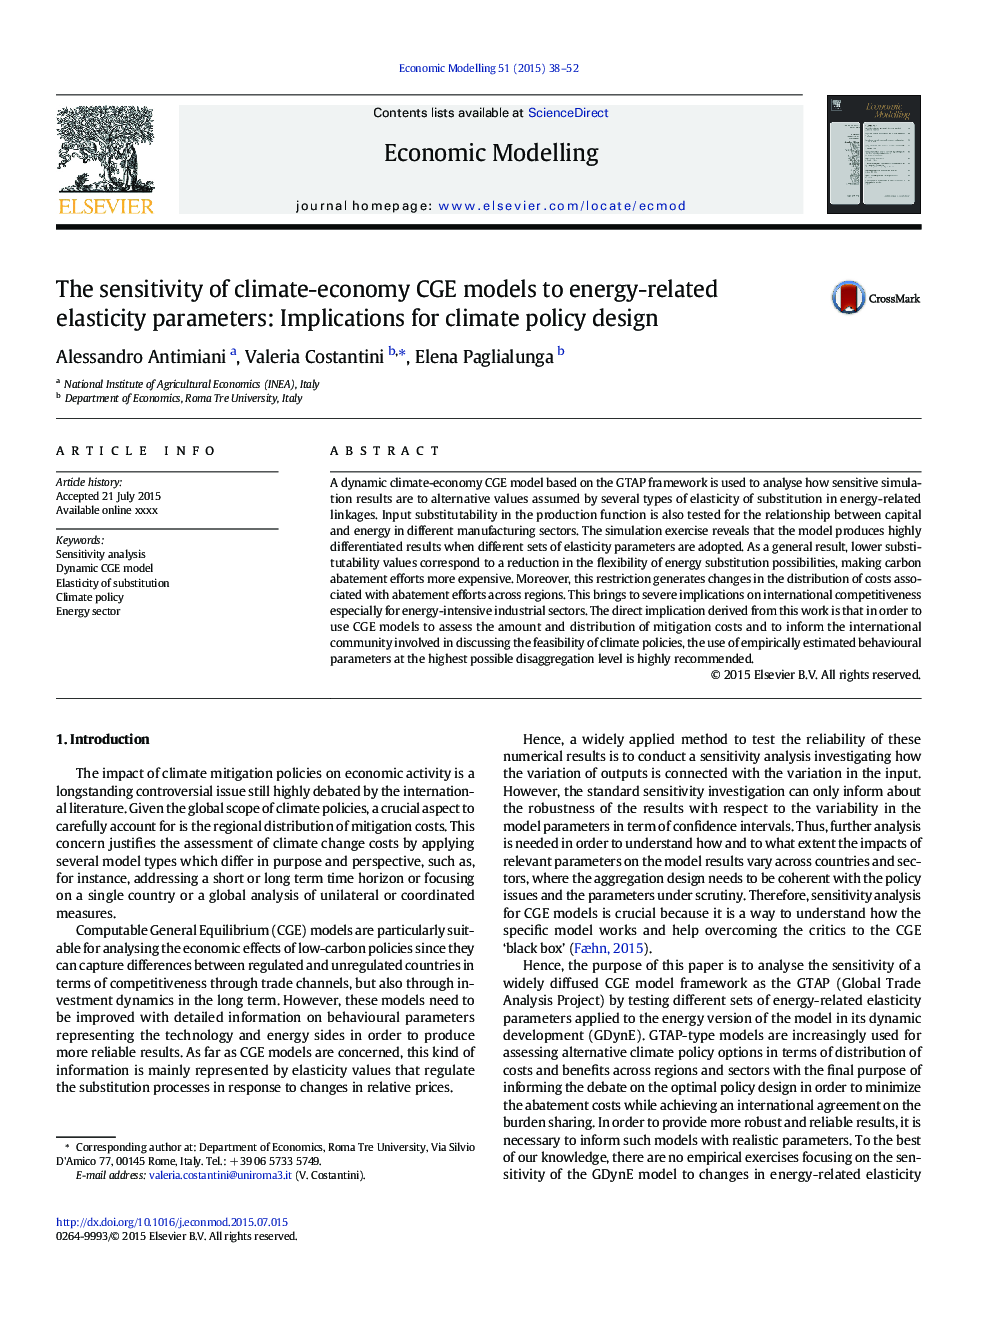 The sensitivity of climate-economy CGE models to energy-related elasticity parameters: Implications for climate policy design